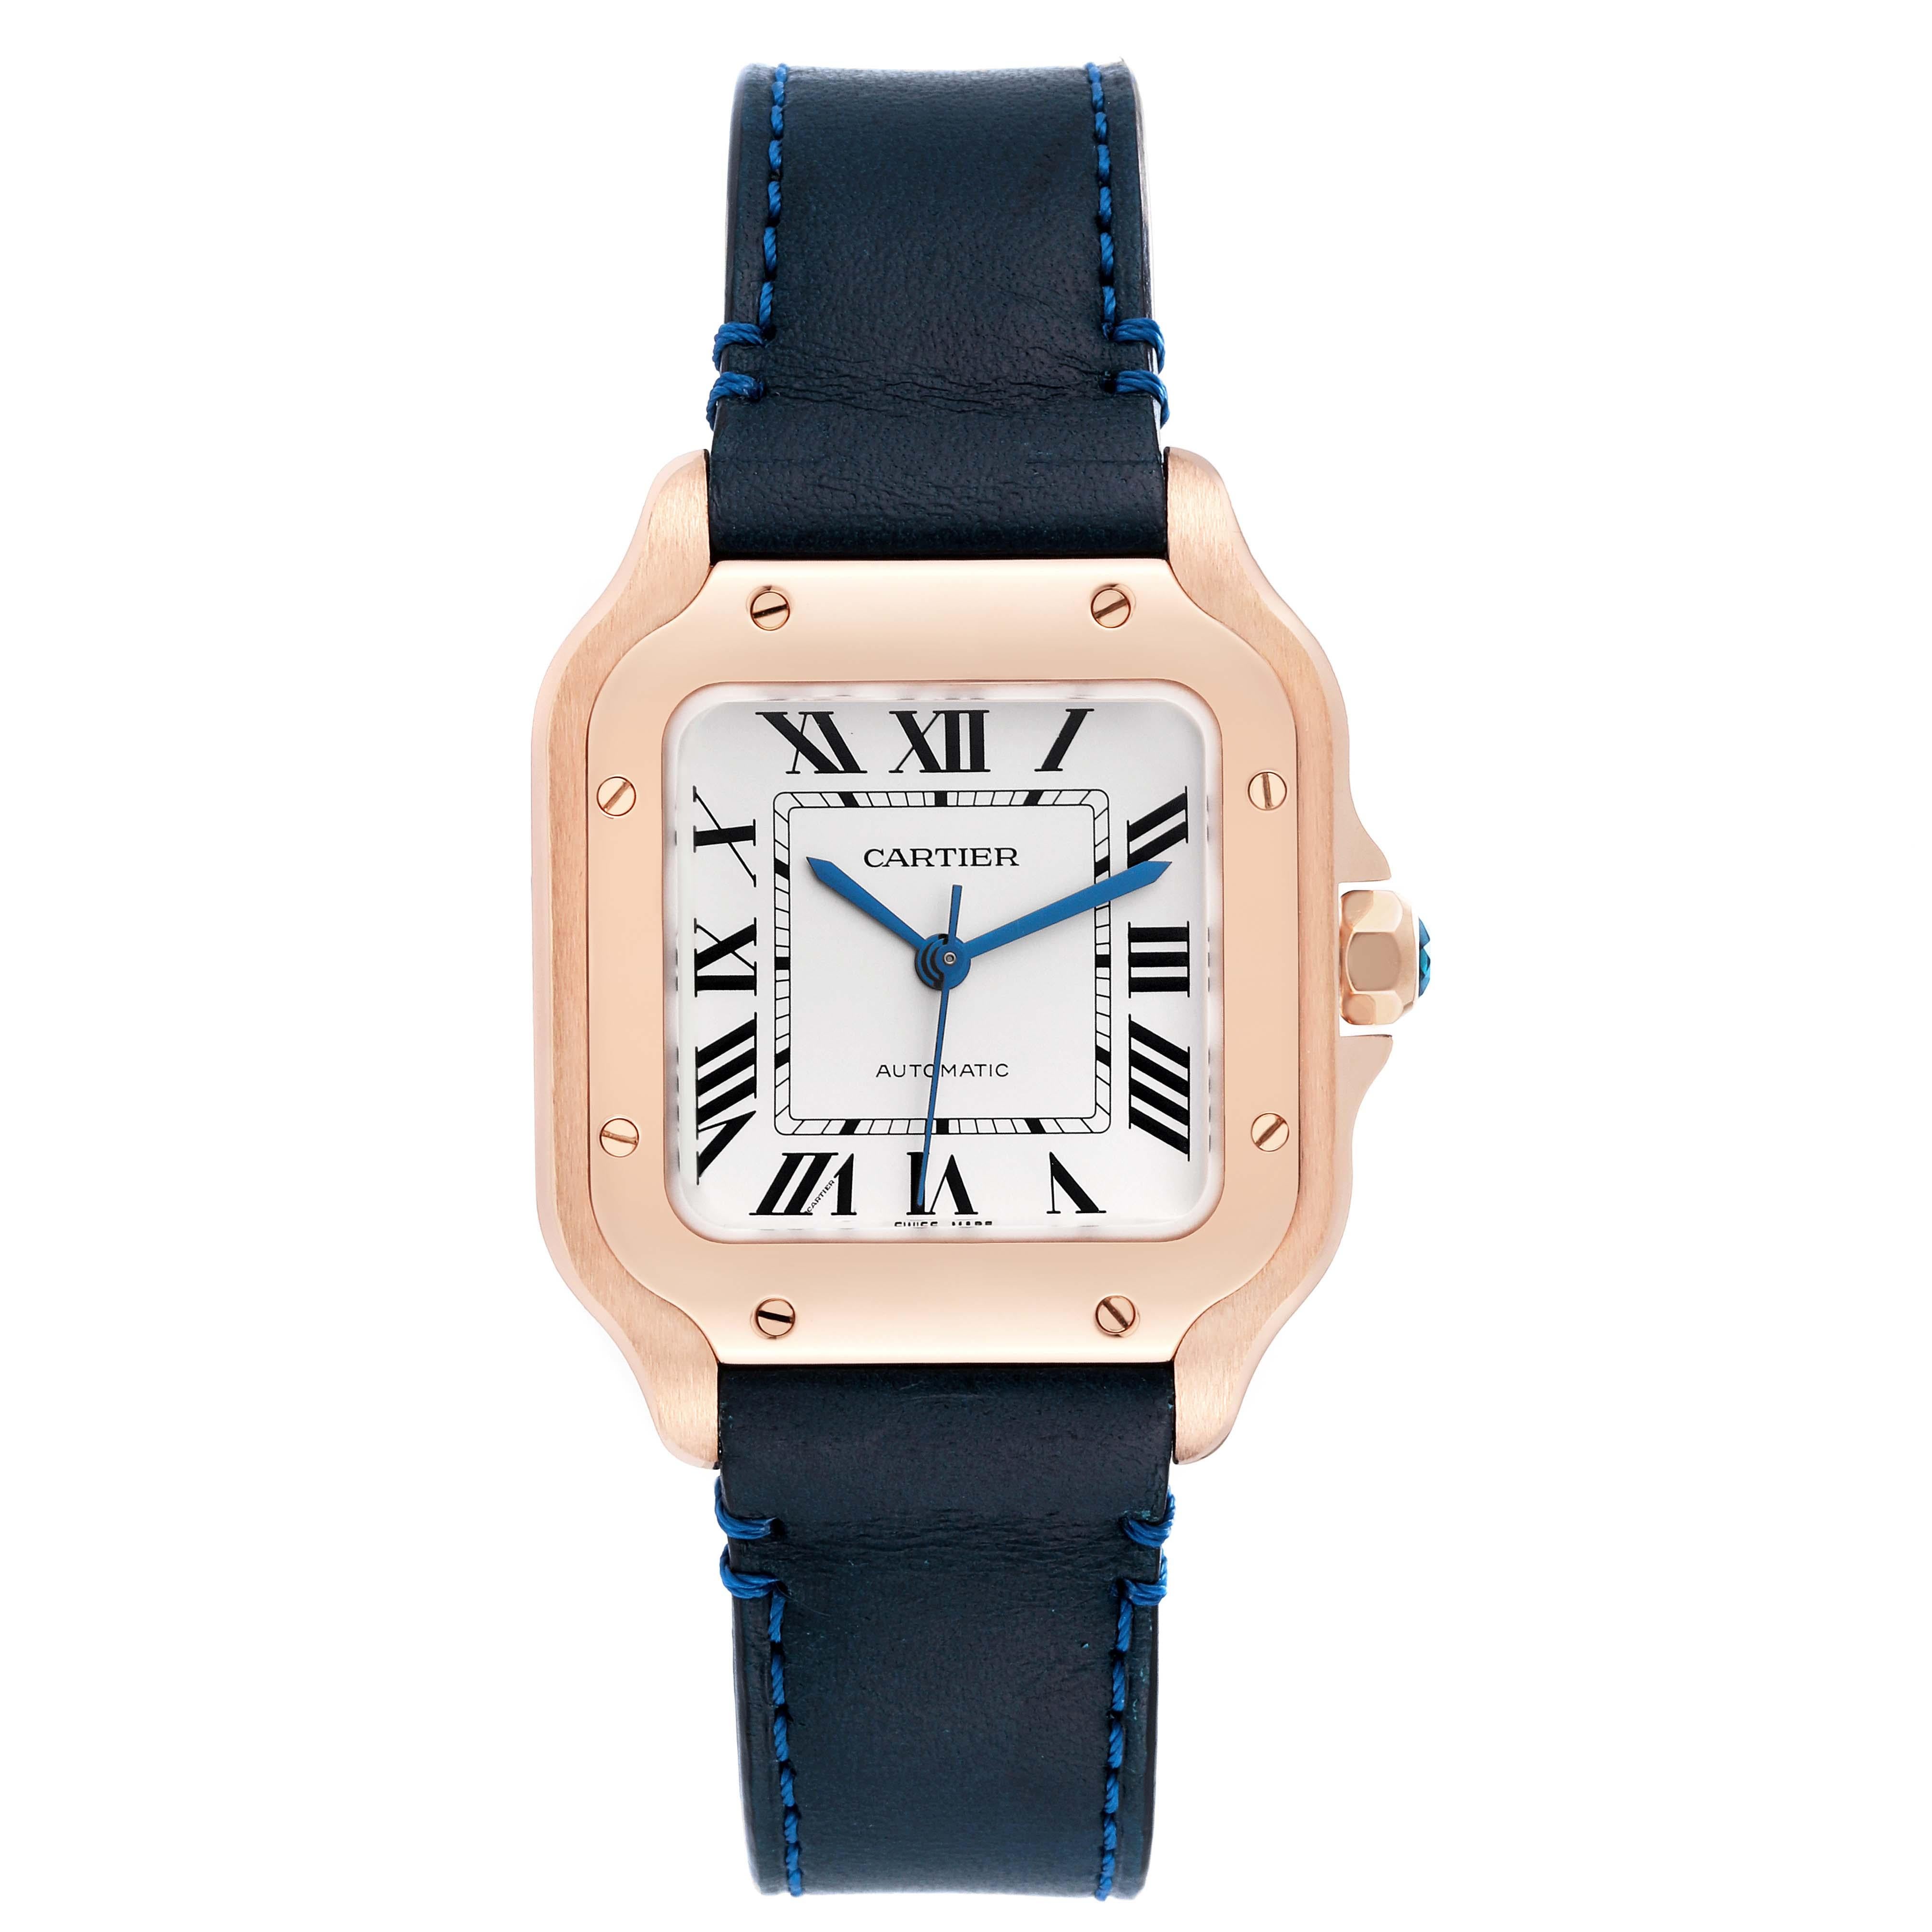 Cartier Santos Midsize Rose Gold Blue Strap Mens Watch WGSA0012 Box Card In Excellent Condition For Sale In Atlanta, GA